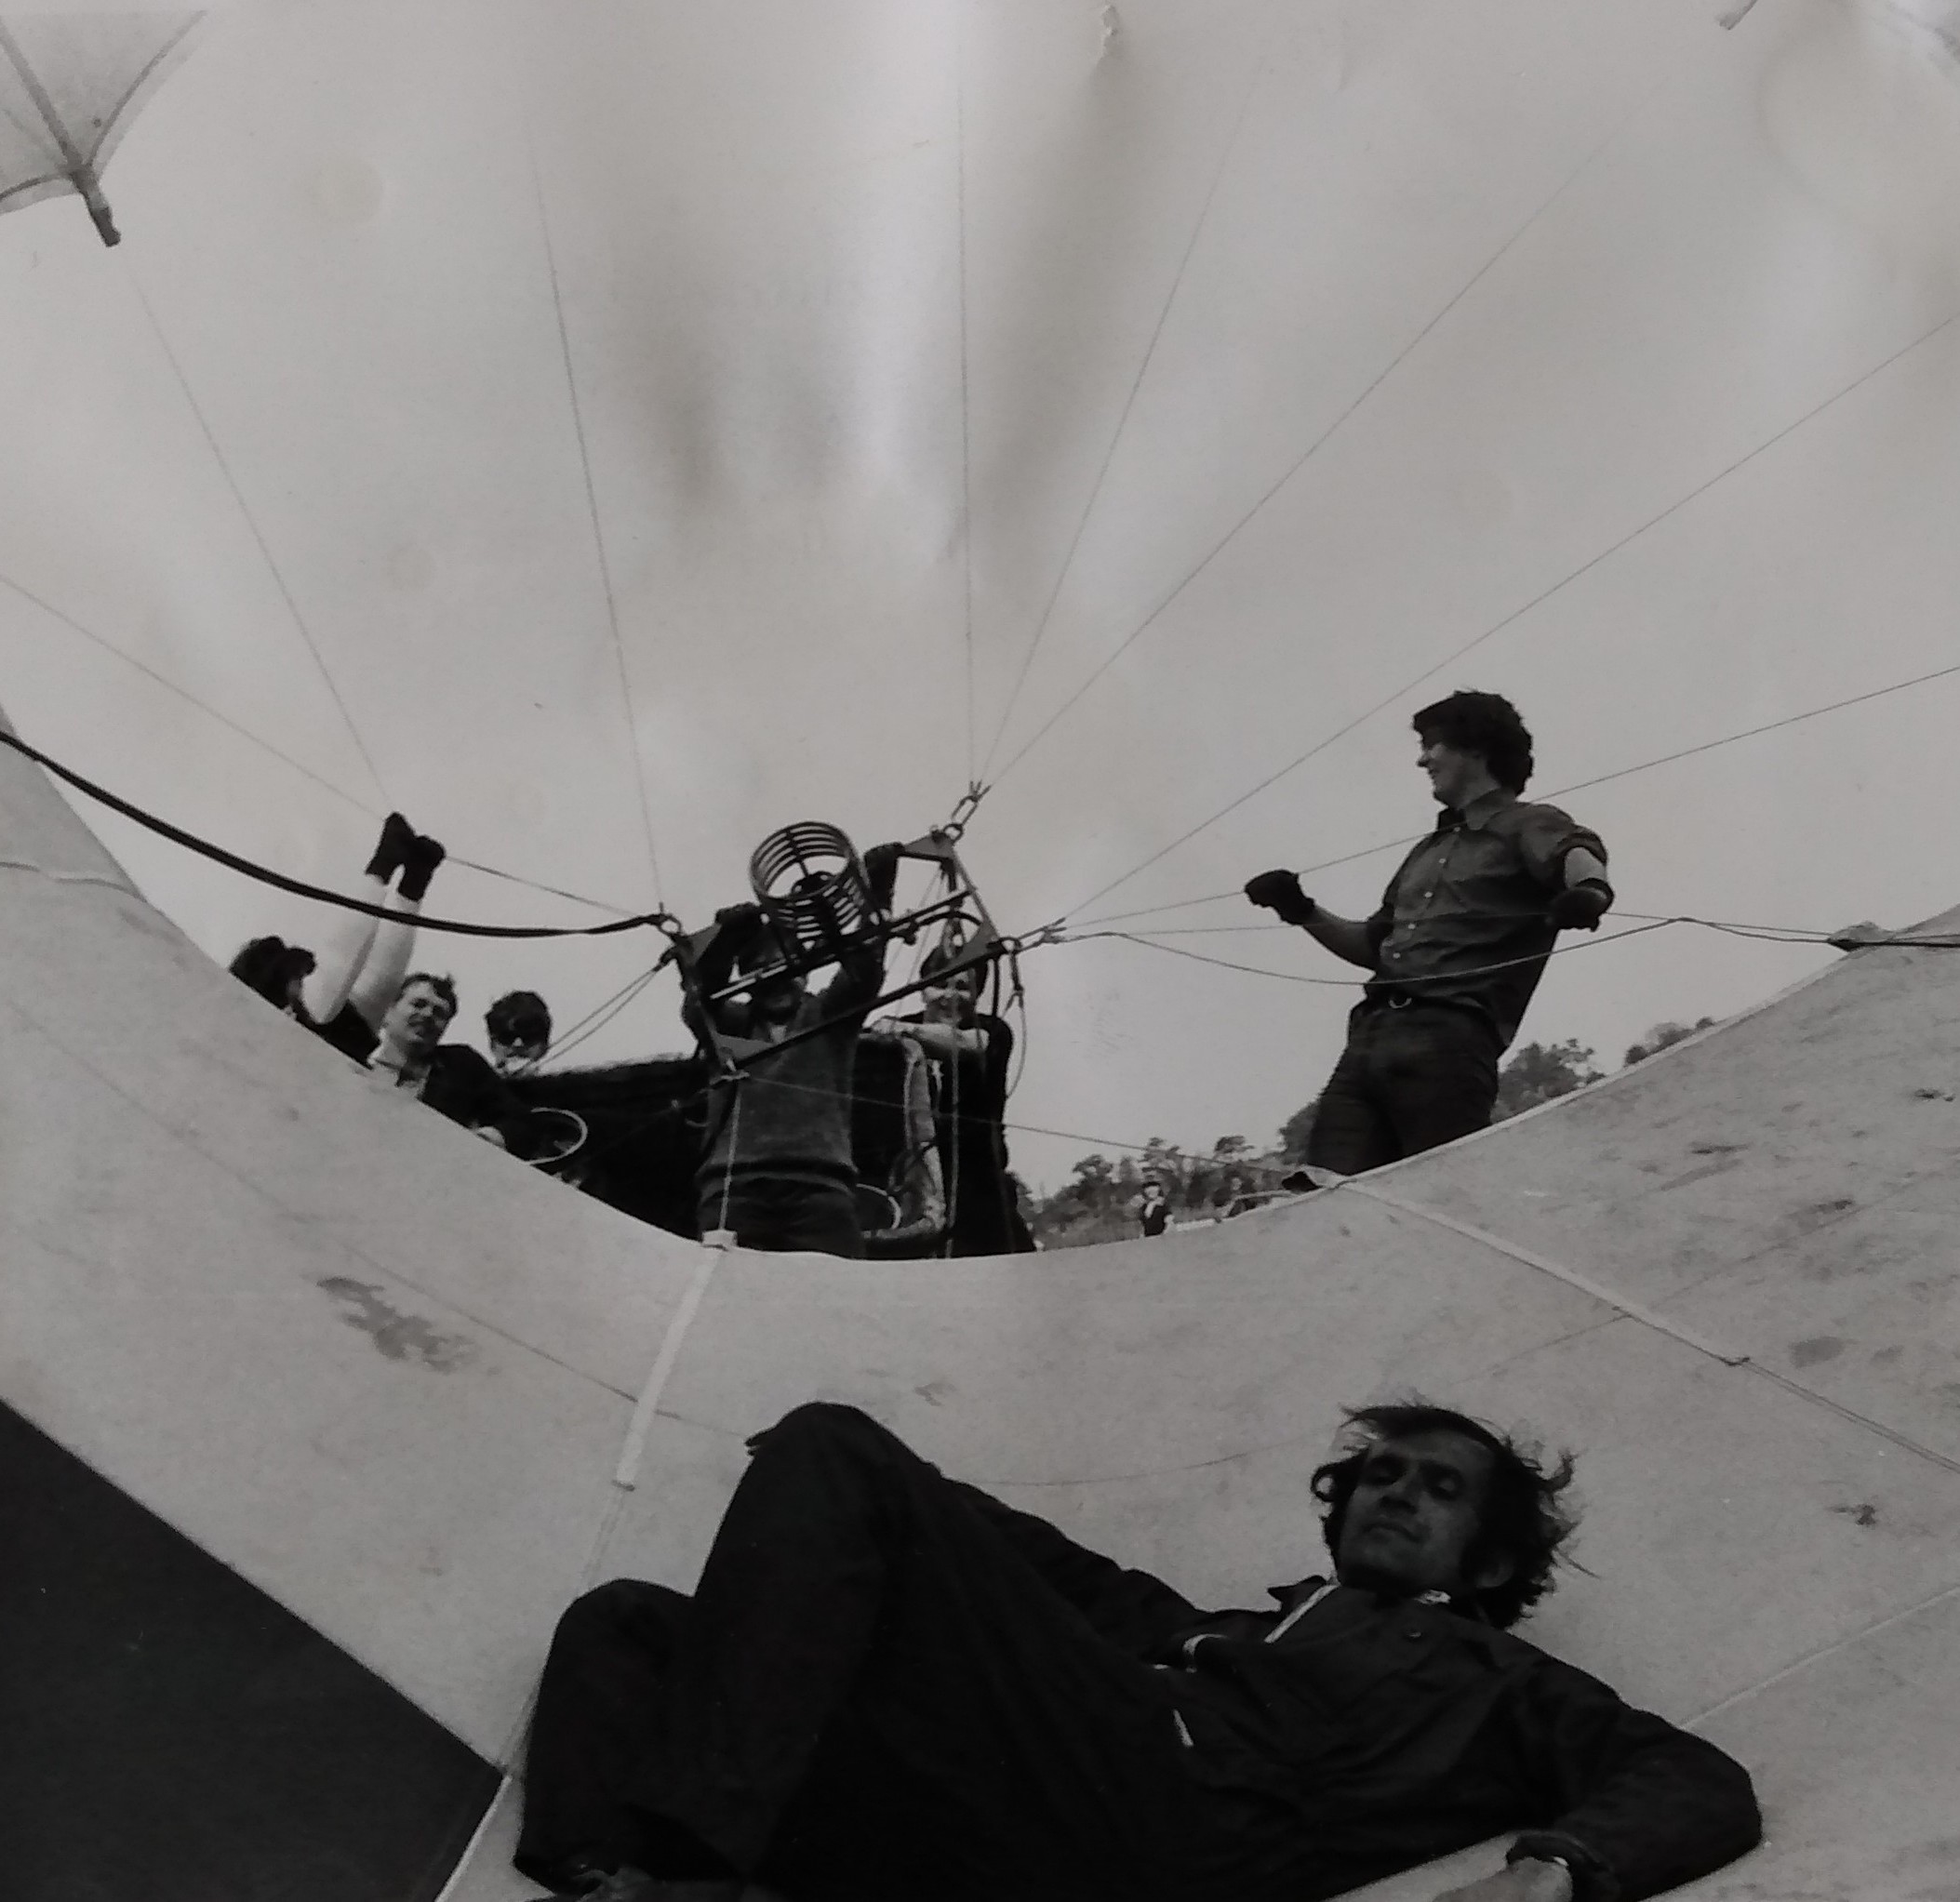 A literal interpratation of going for a ride in a balloon... Pilot Tom Sage takes a tumble before take-off from a windy showground at Perdiswell in May 1974